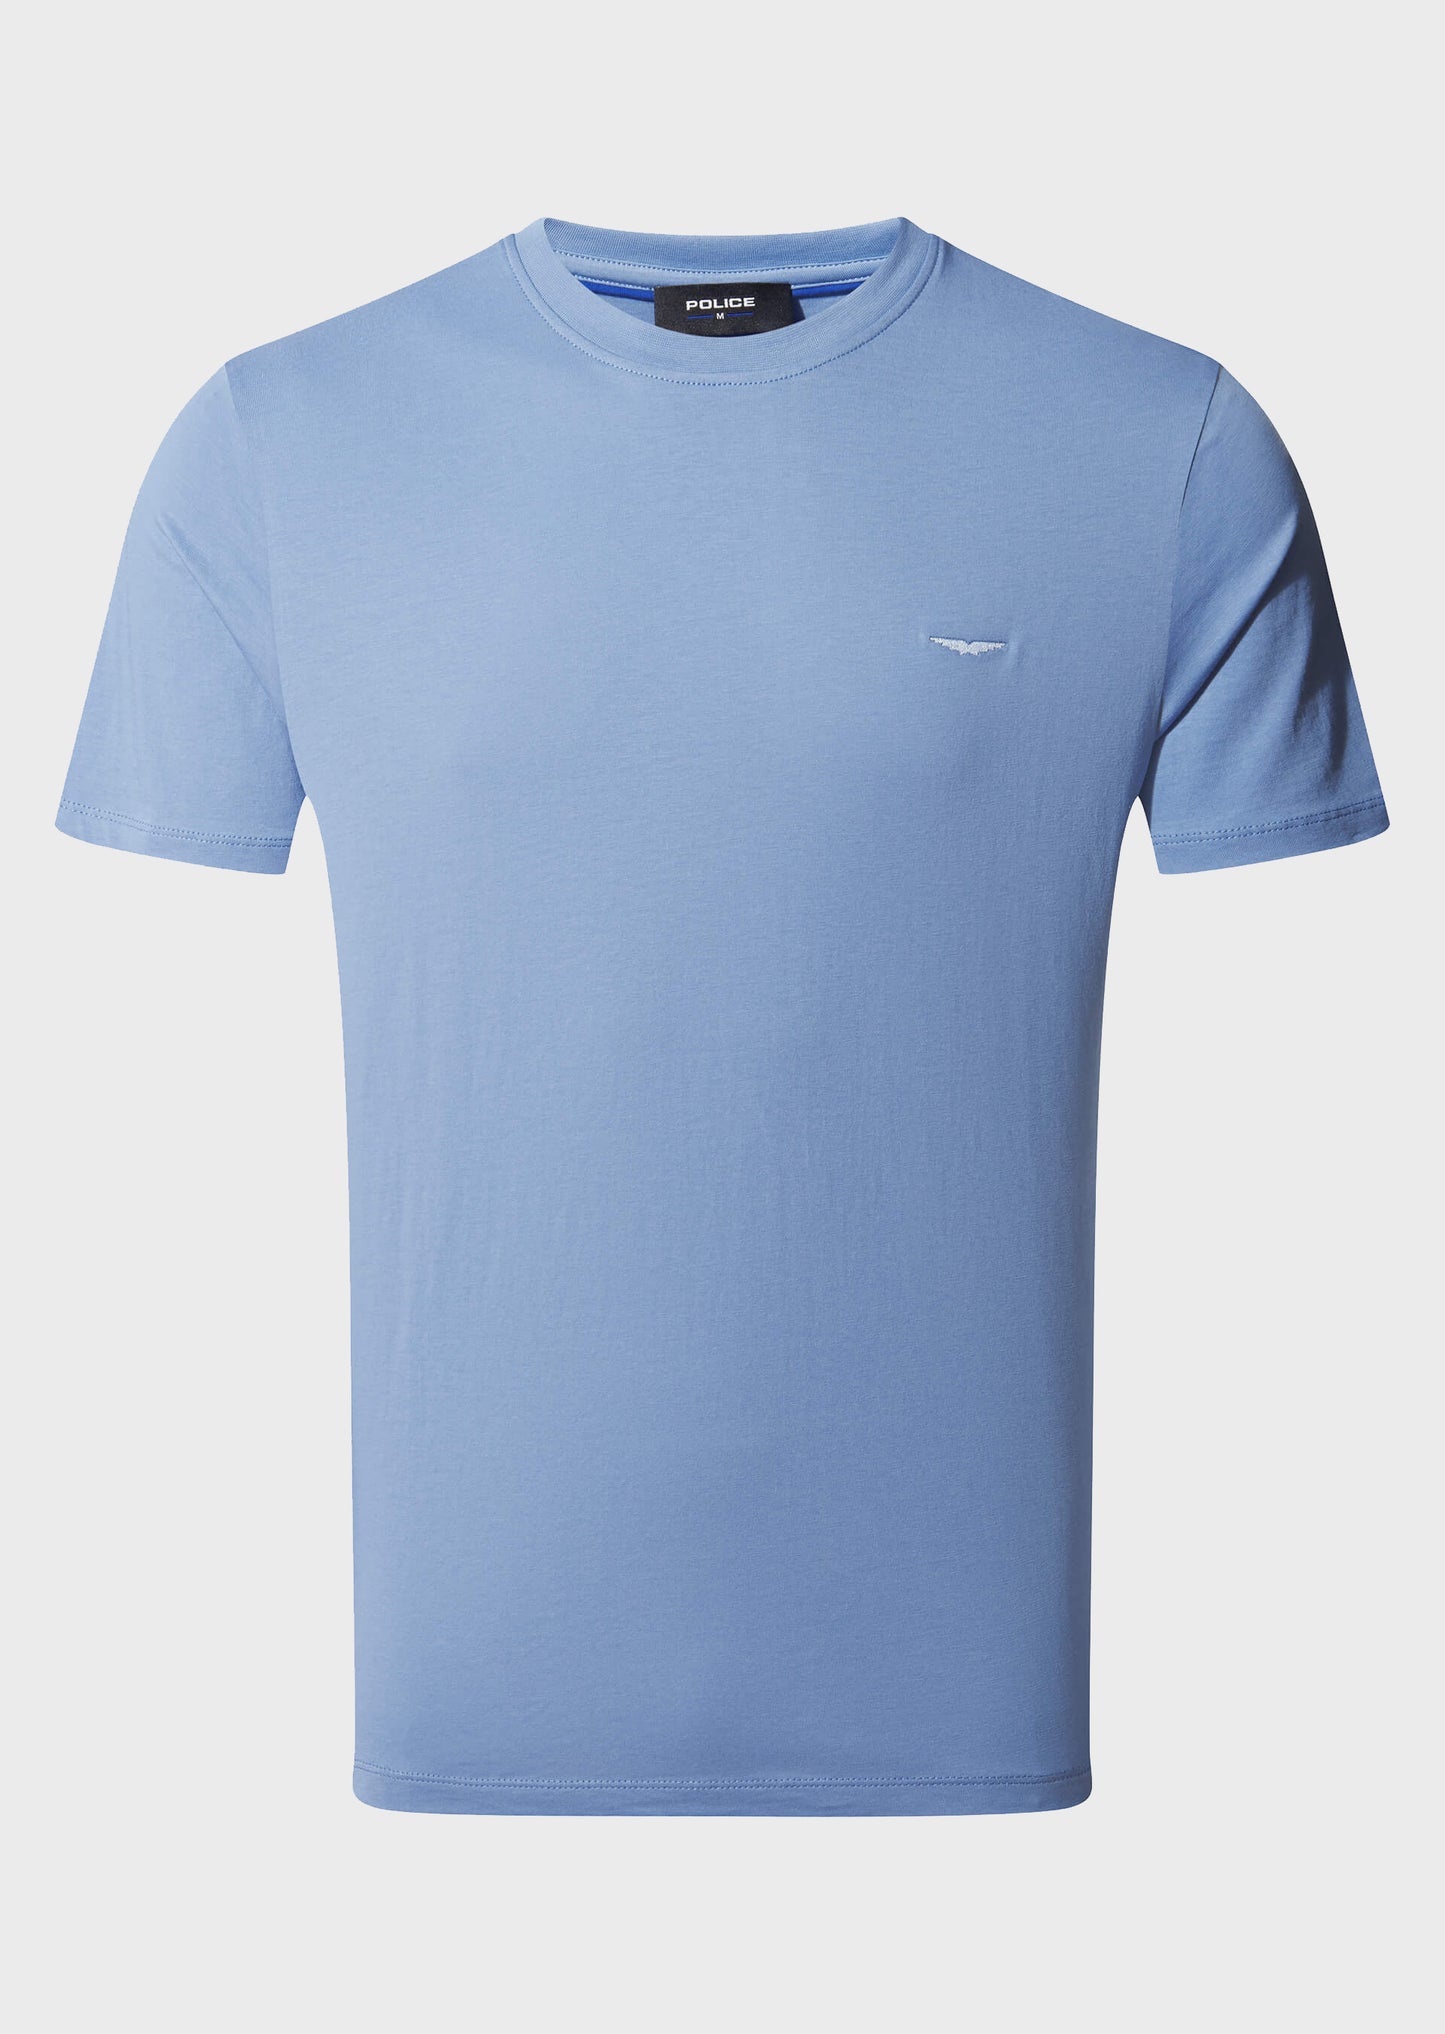 Abbey Tranquil Blue T-Shirt